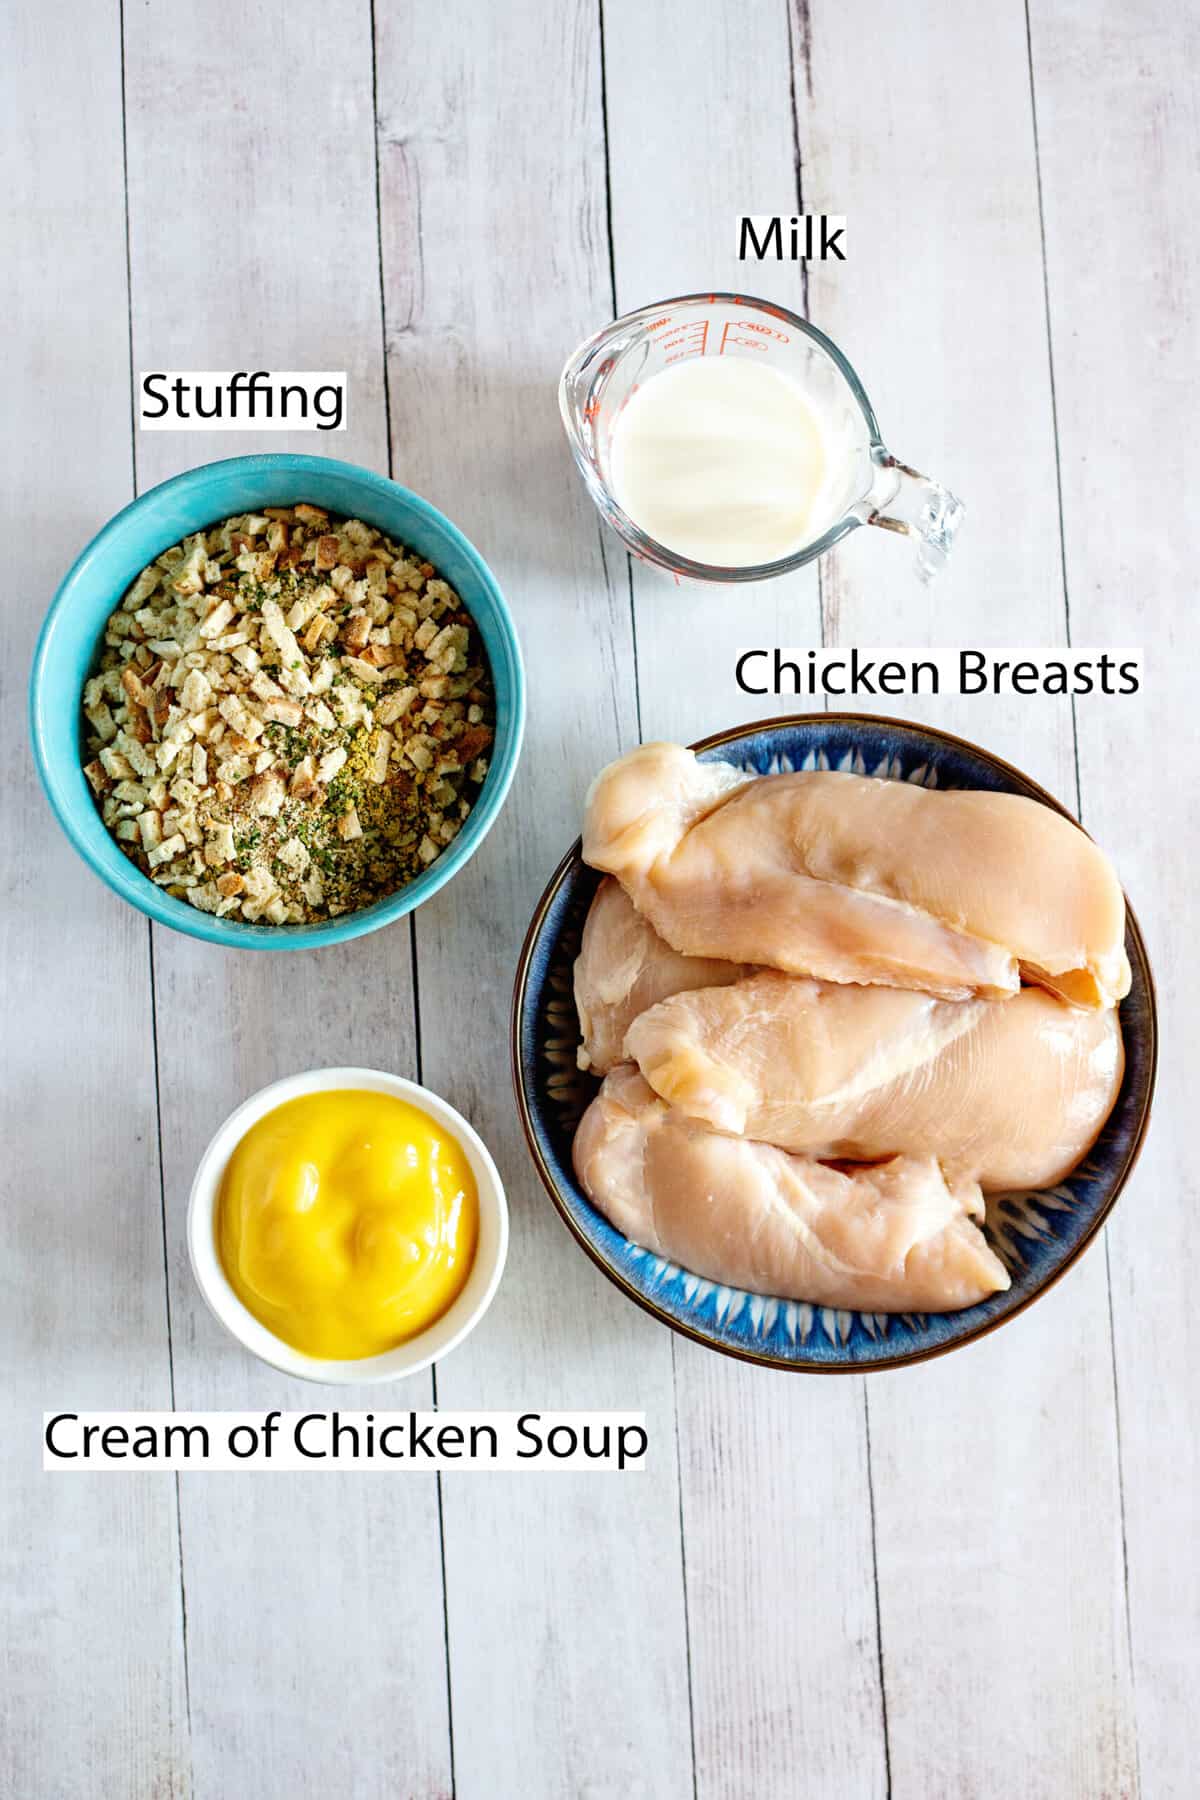 ingredients for stuffing-coated chicken